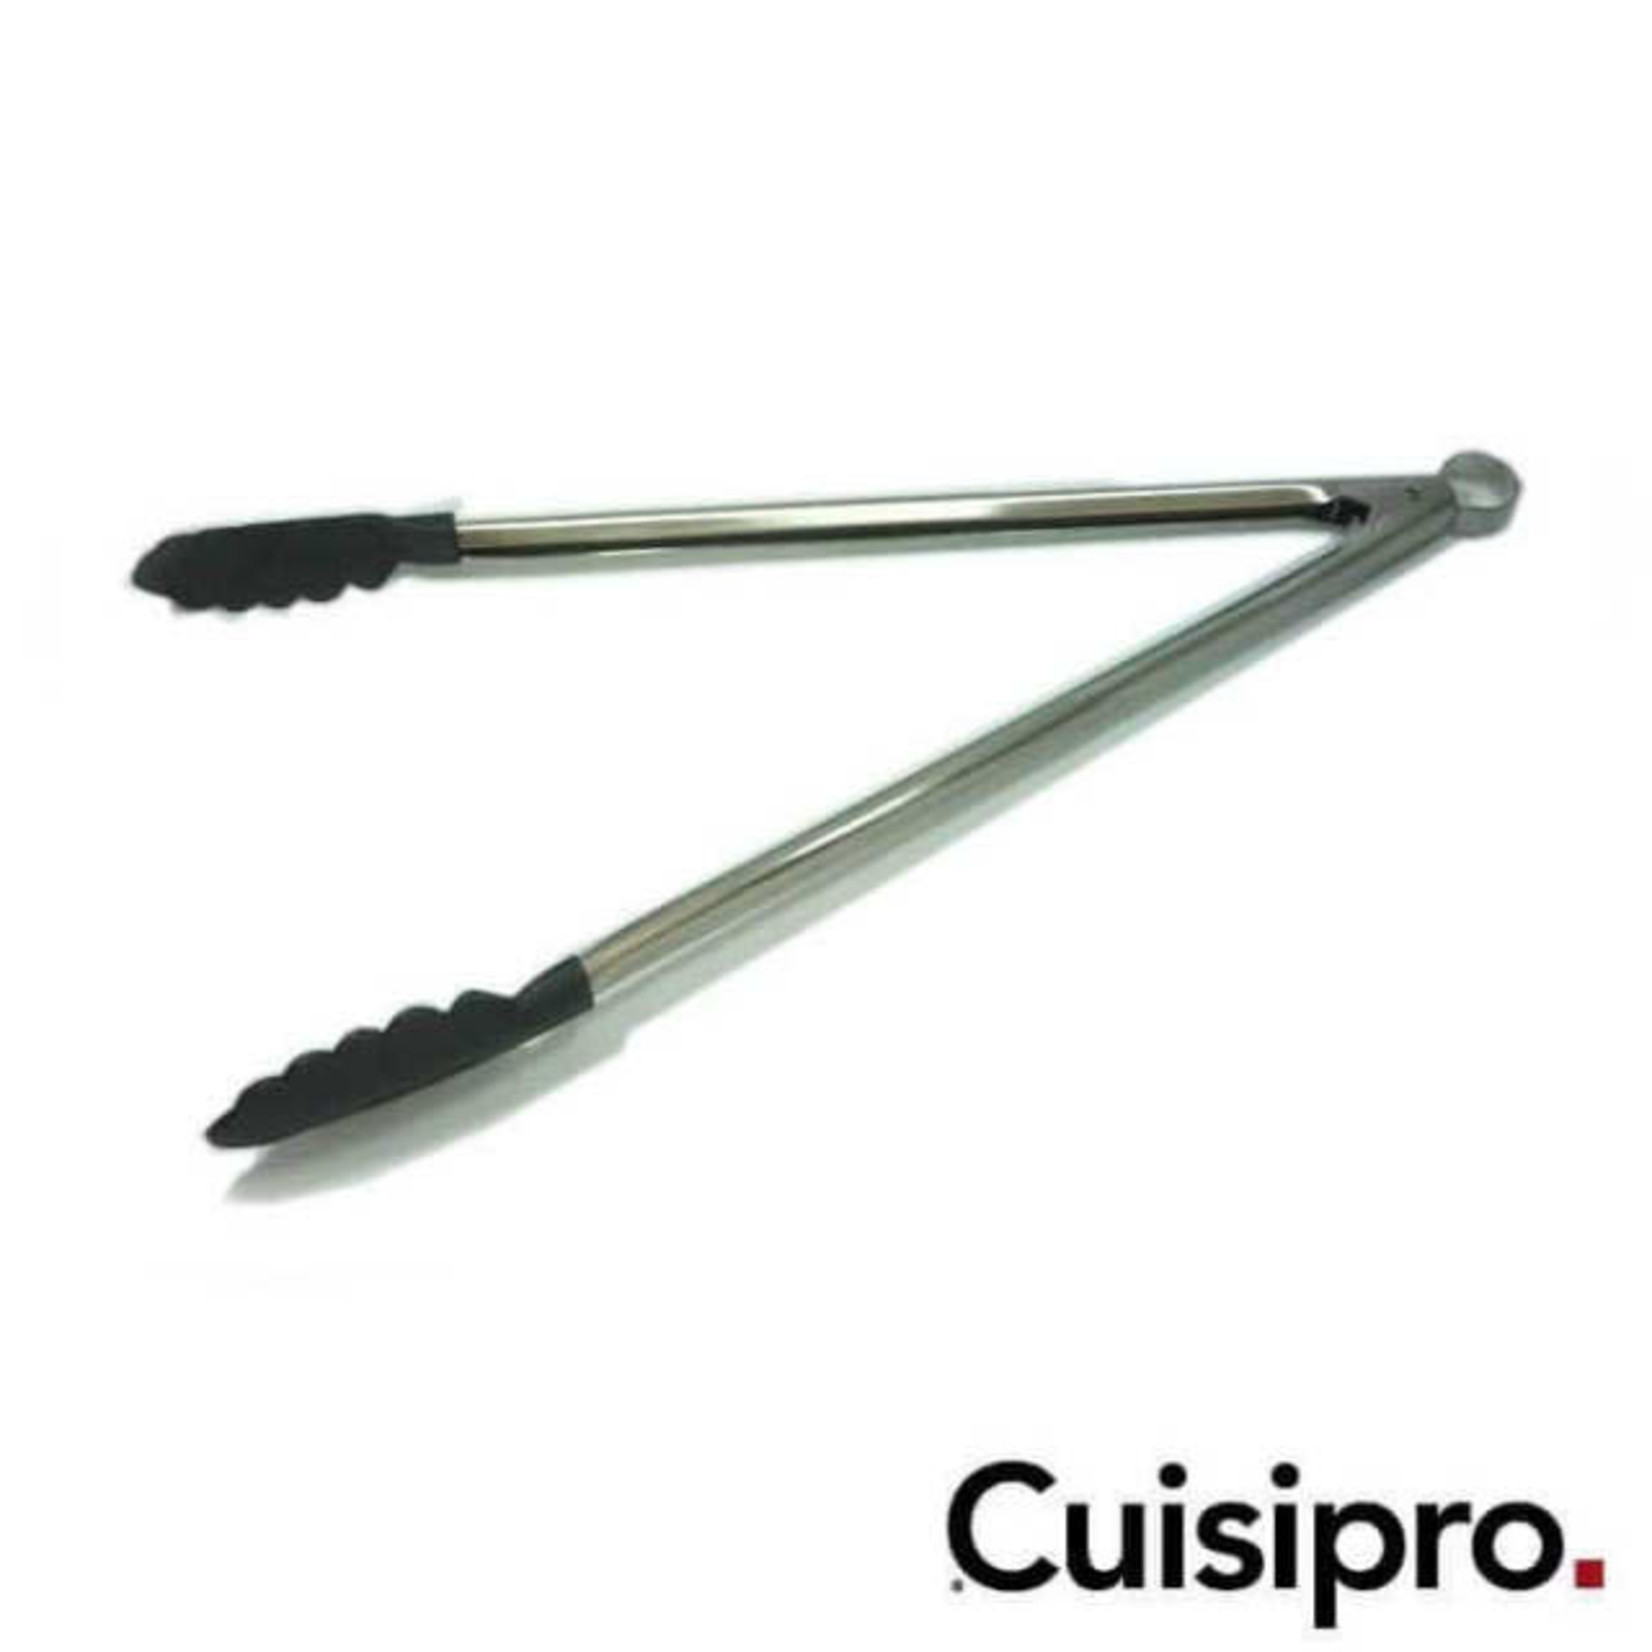 Cuisipro Locking Tongs Non-Stick Nylon 40.6cm/16 - The Westview Shop